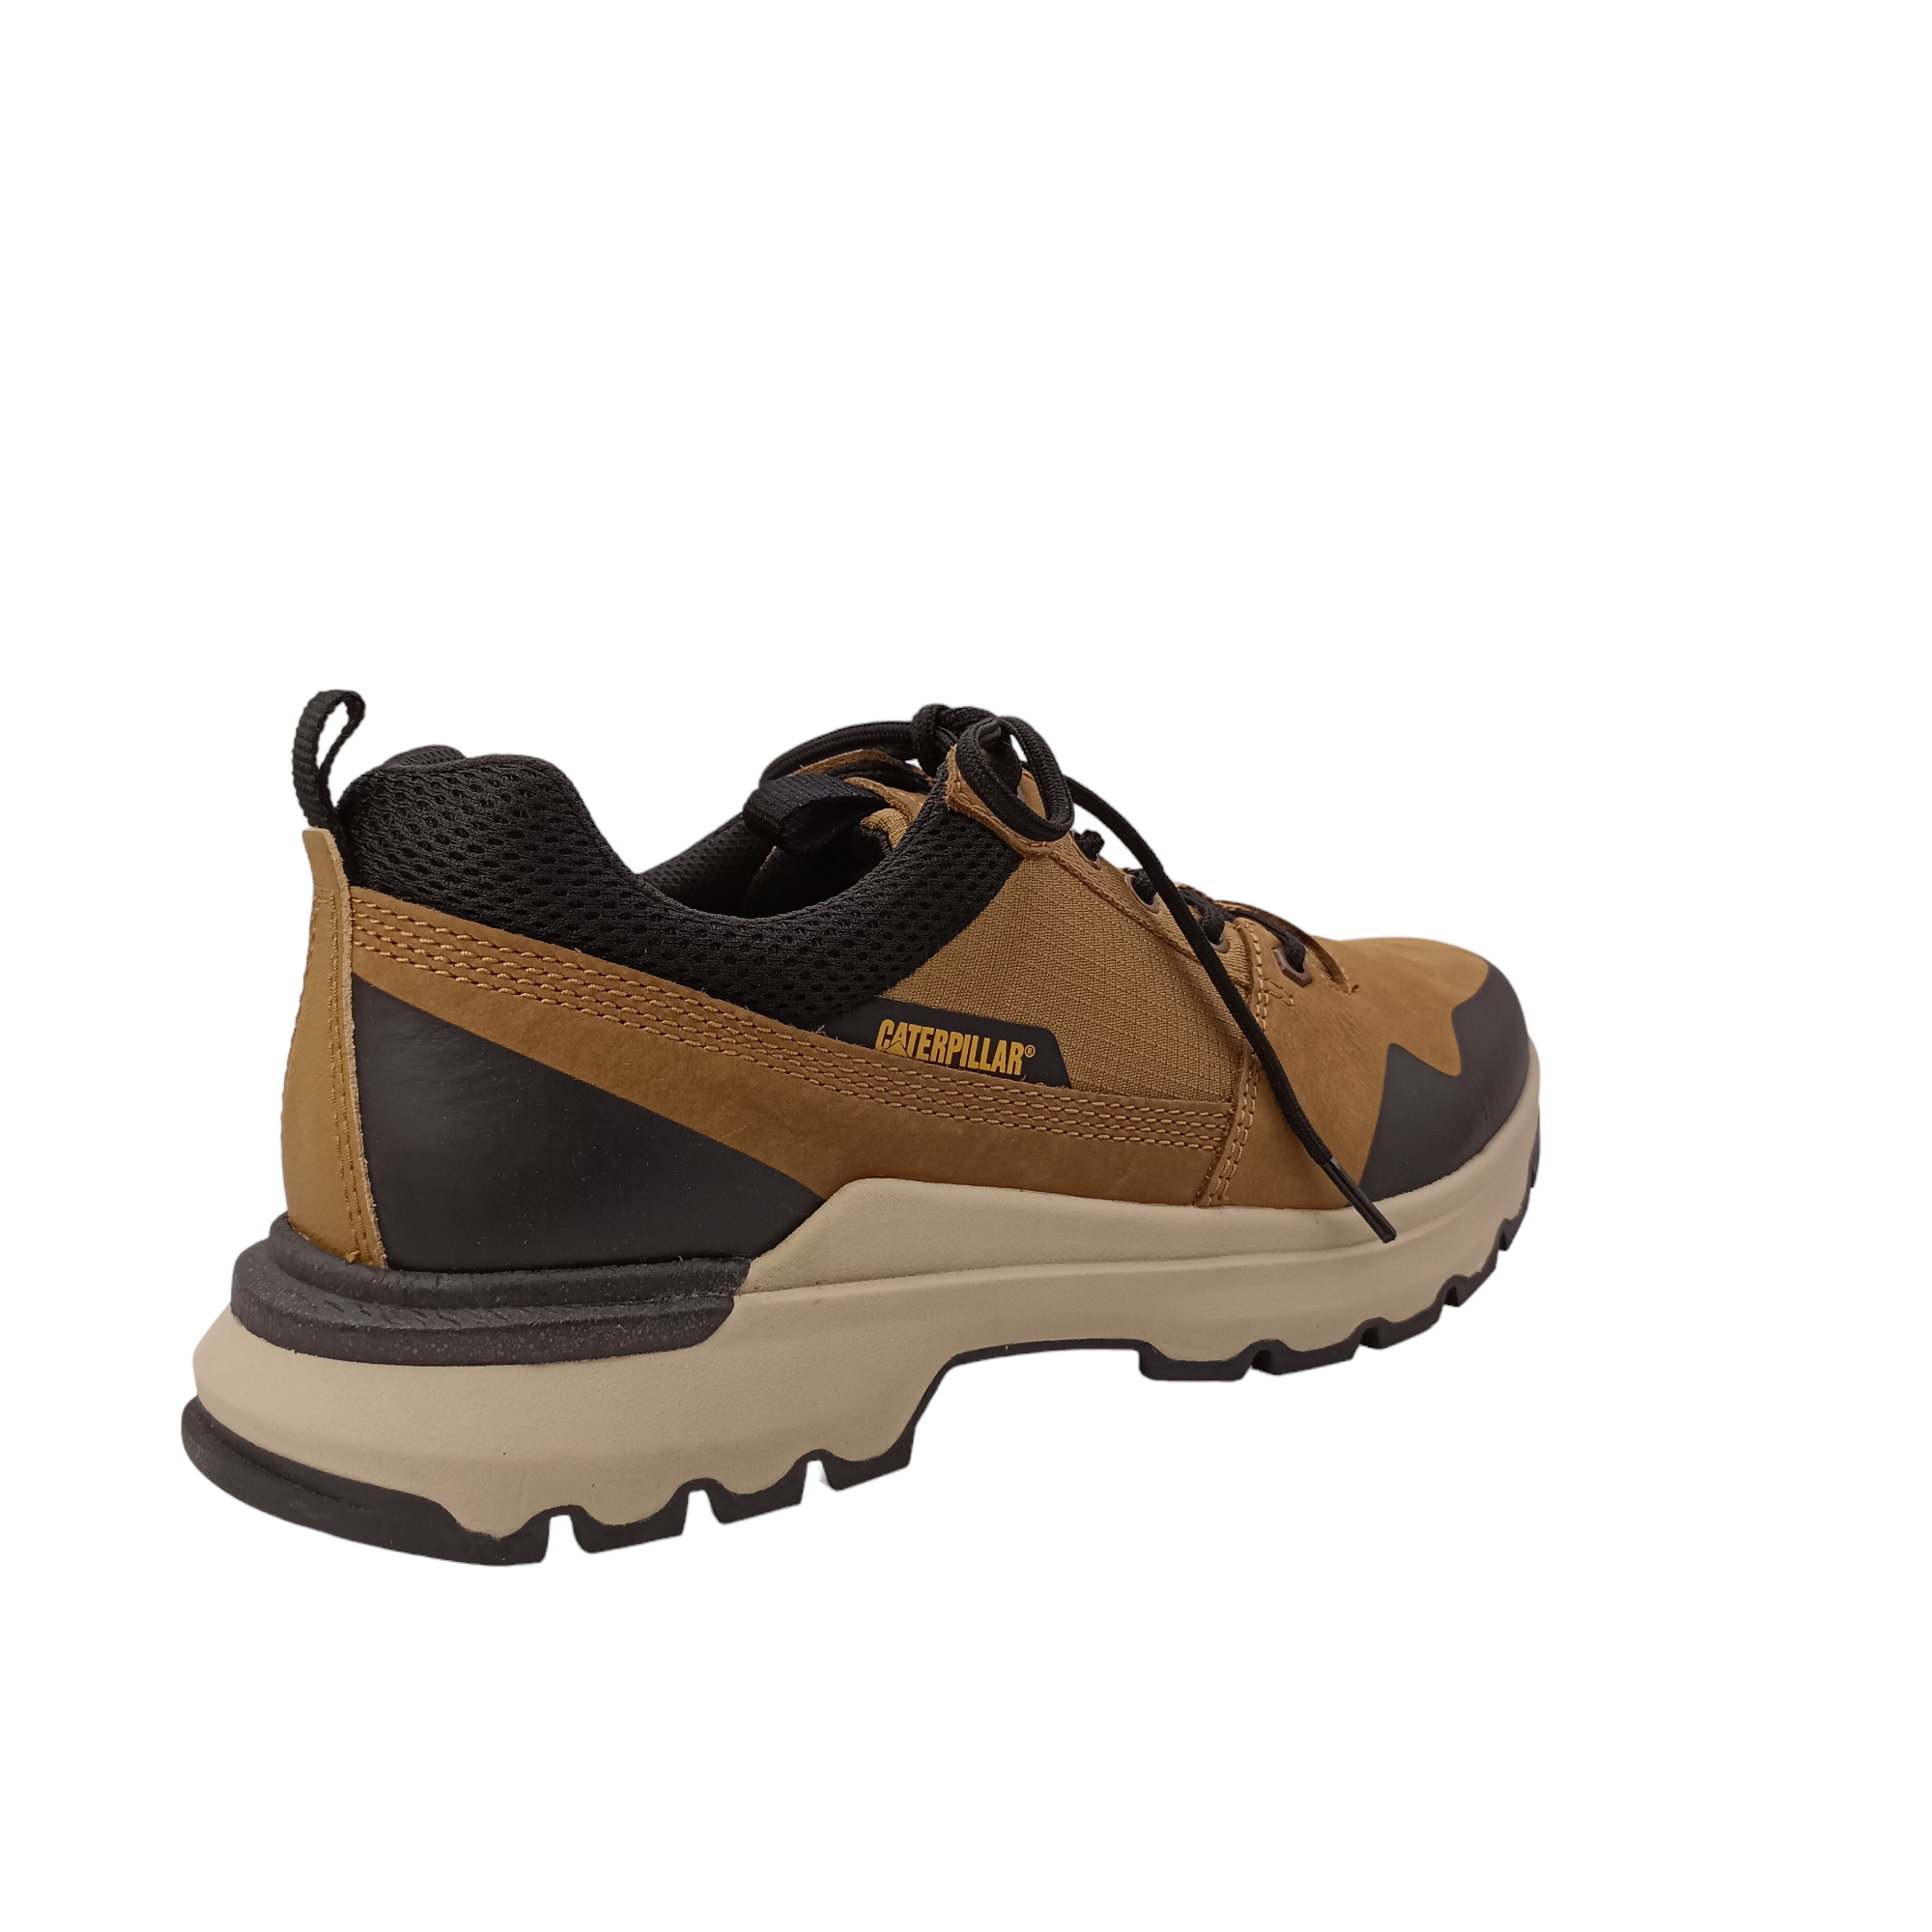 Shop Colorado Lo Caterpillar - with shoe&amp;me - from Caterpillar - Sneakers - Mens, Sneaker, Winter - [collection]